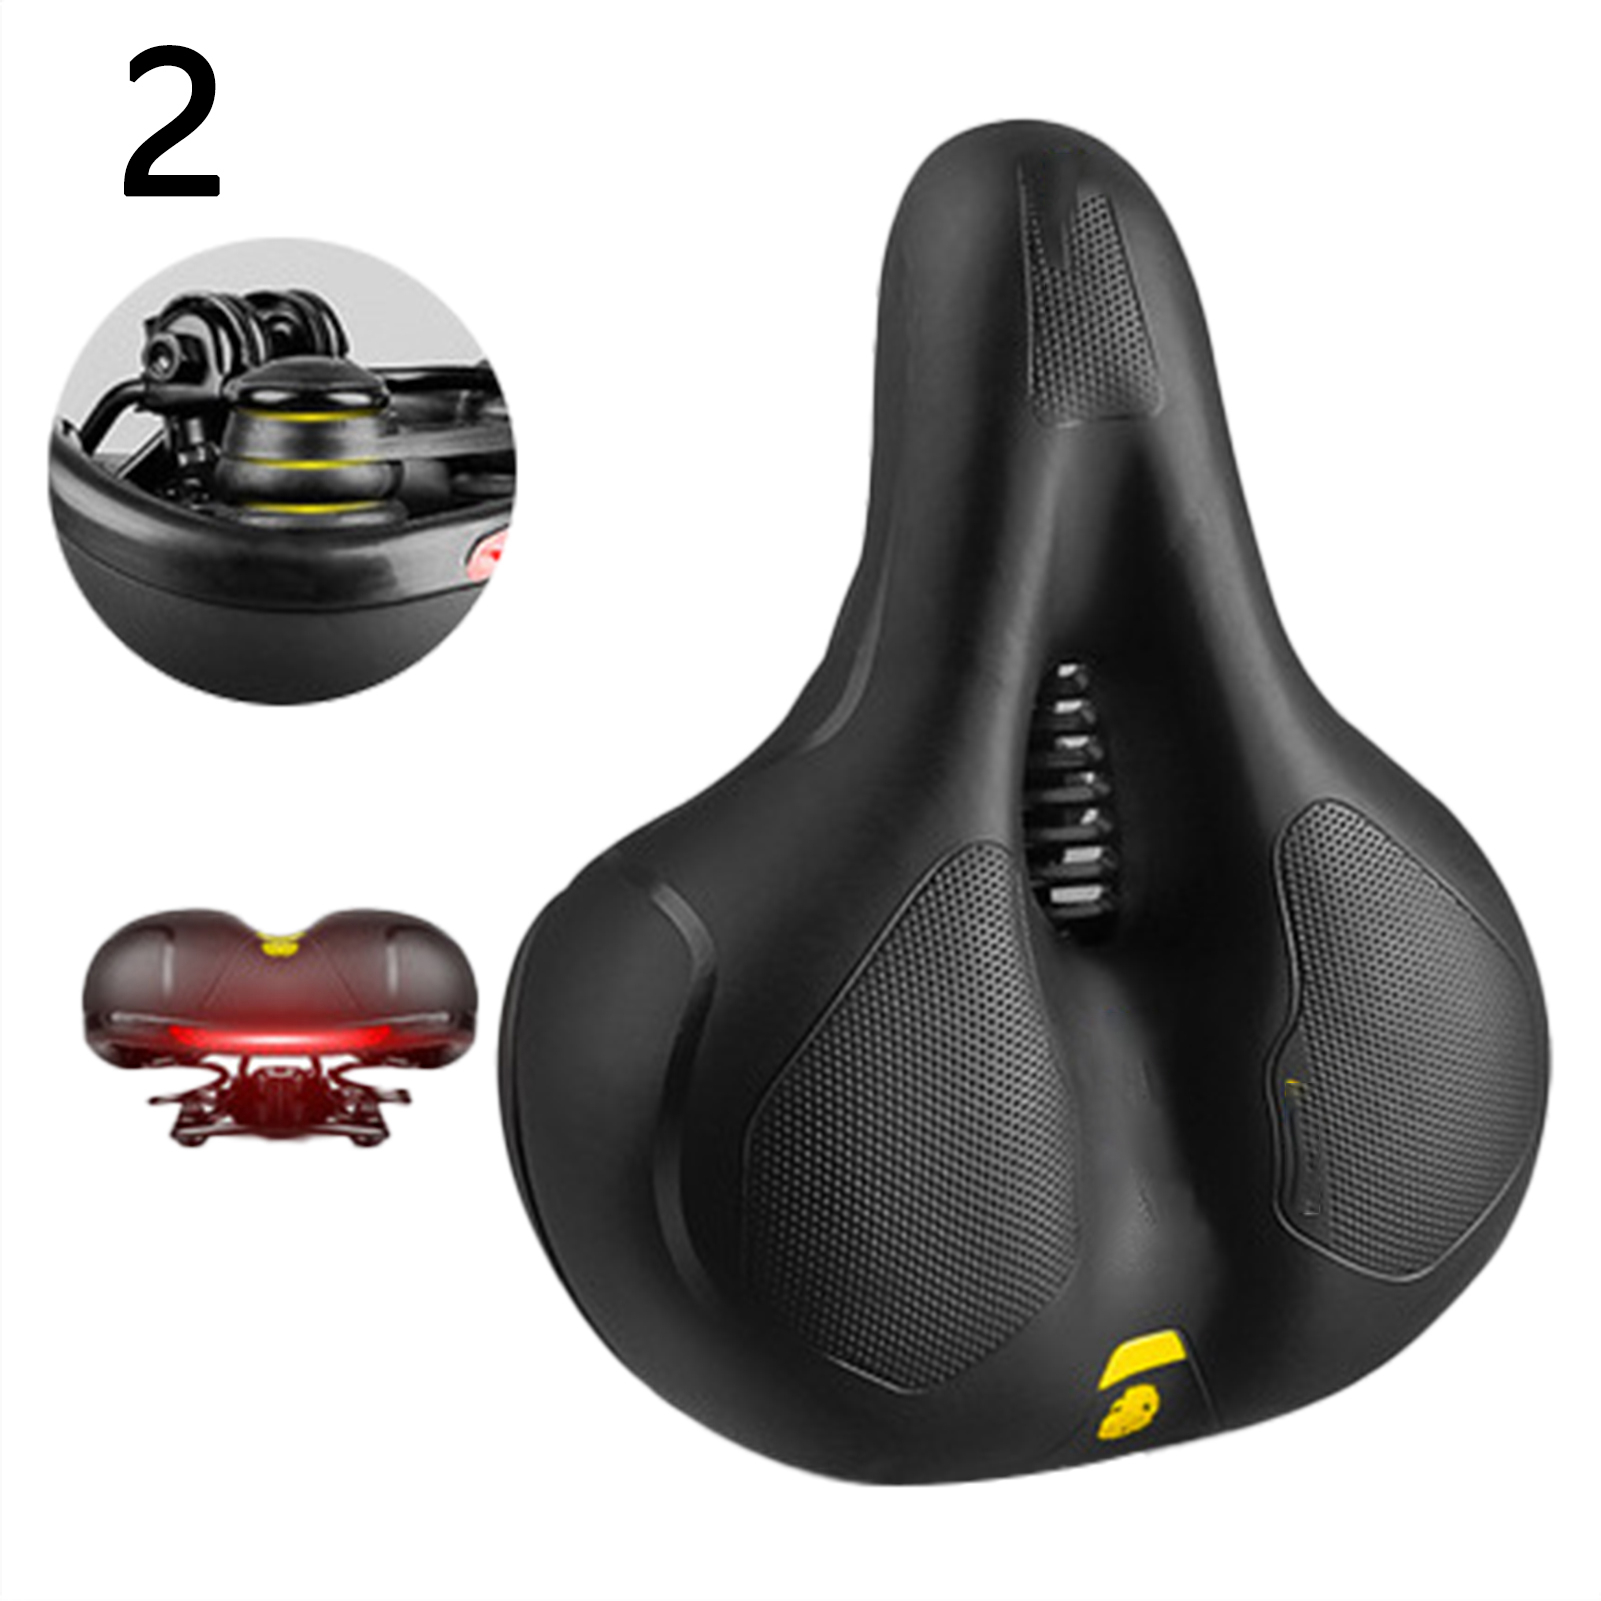 Comfort Breathable Bike Saddle Bicycle Cycling Seat Men Women Wide Cushion Pads 